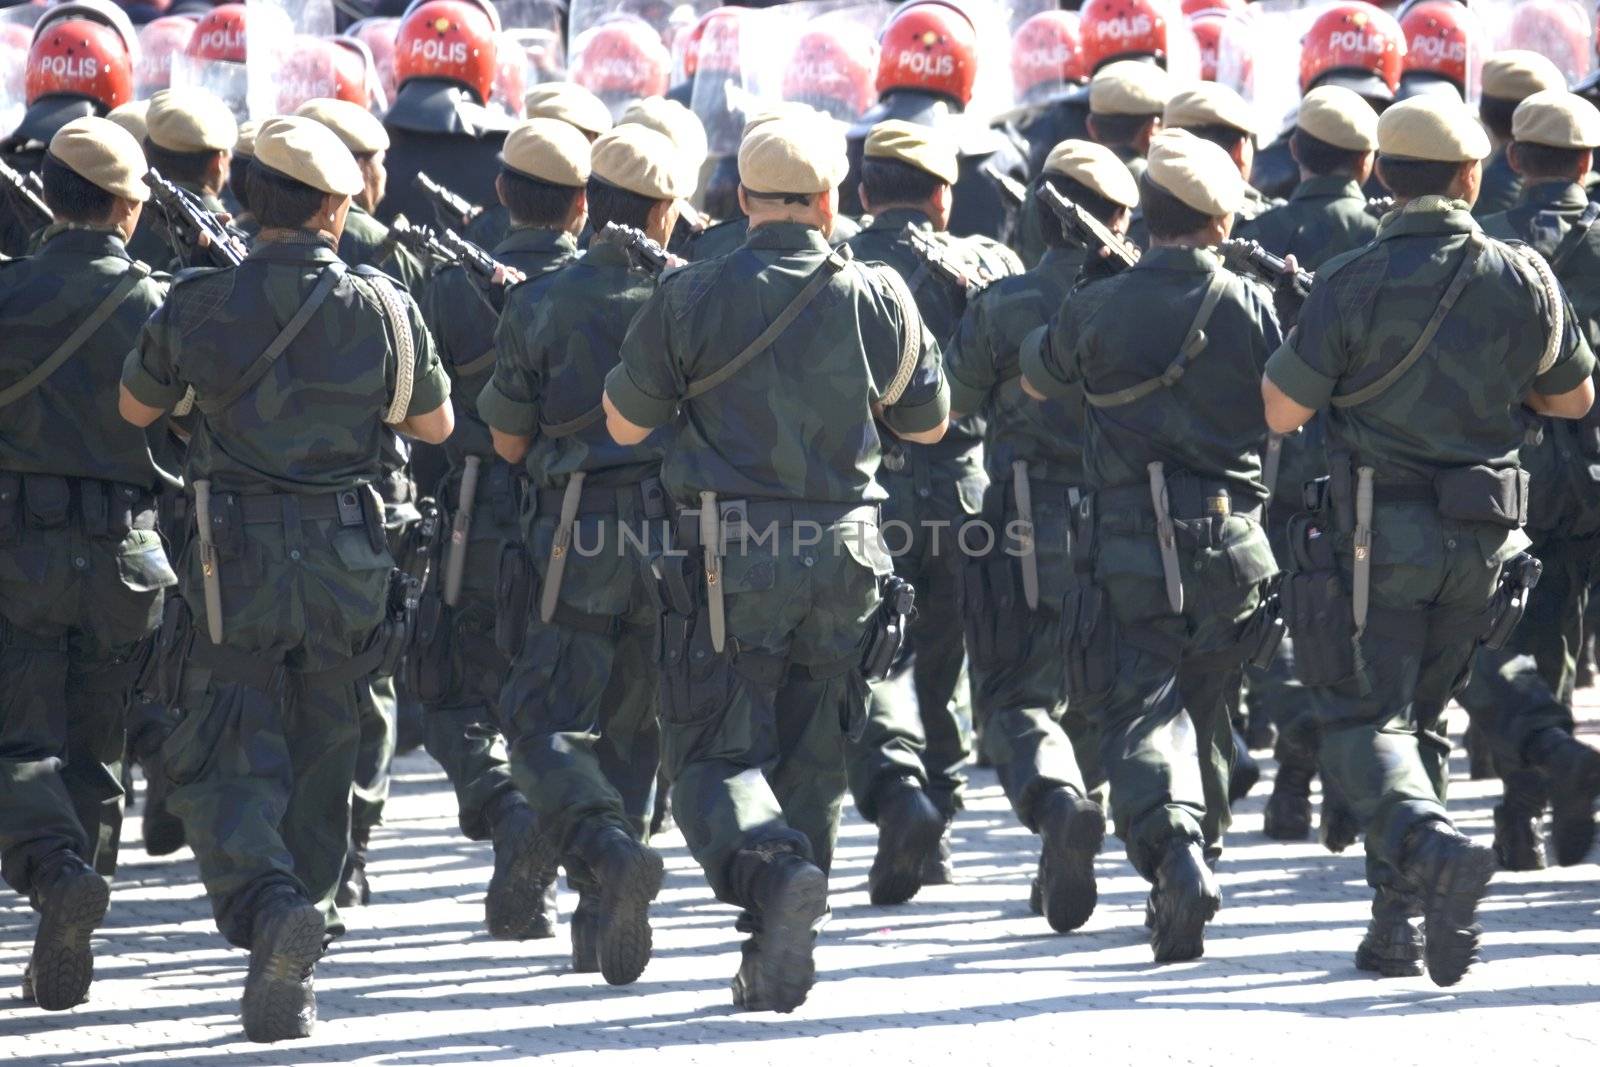 Image of armed uniformed police marching.